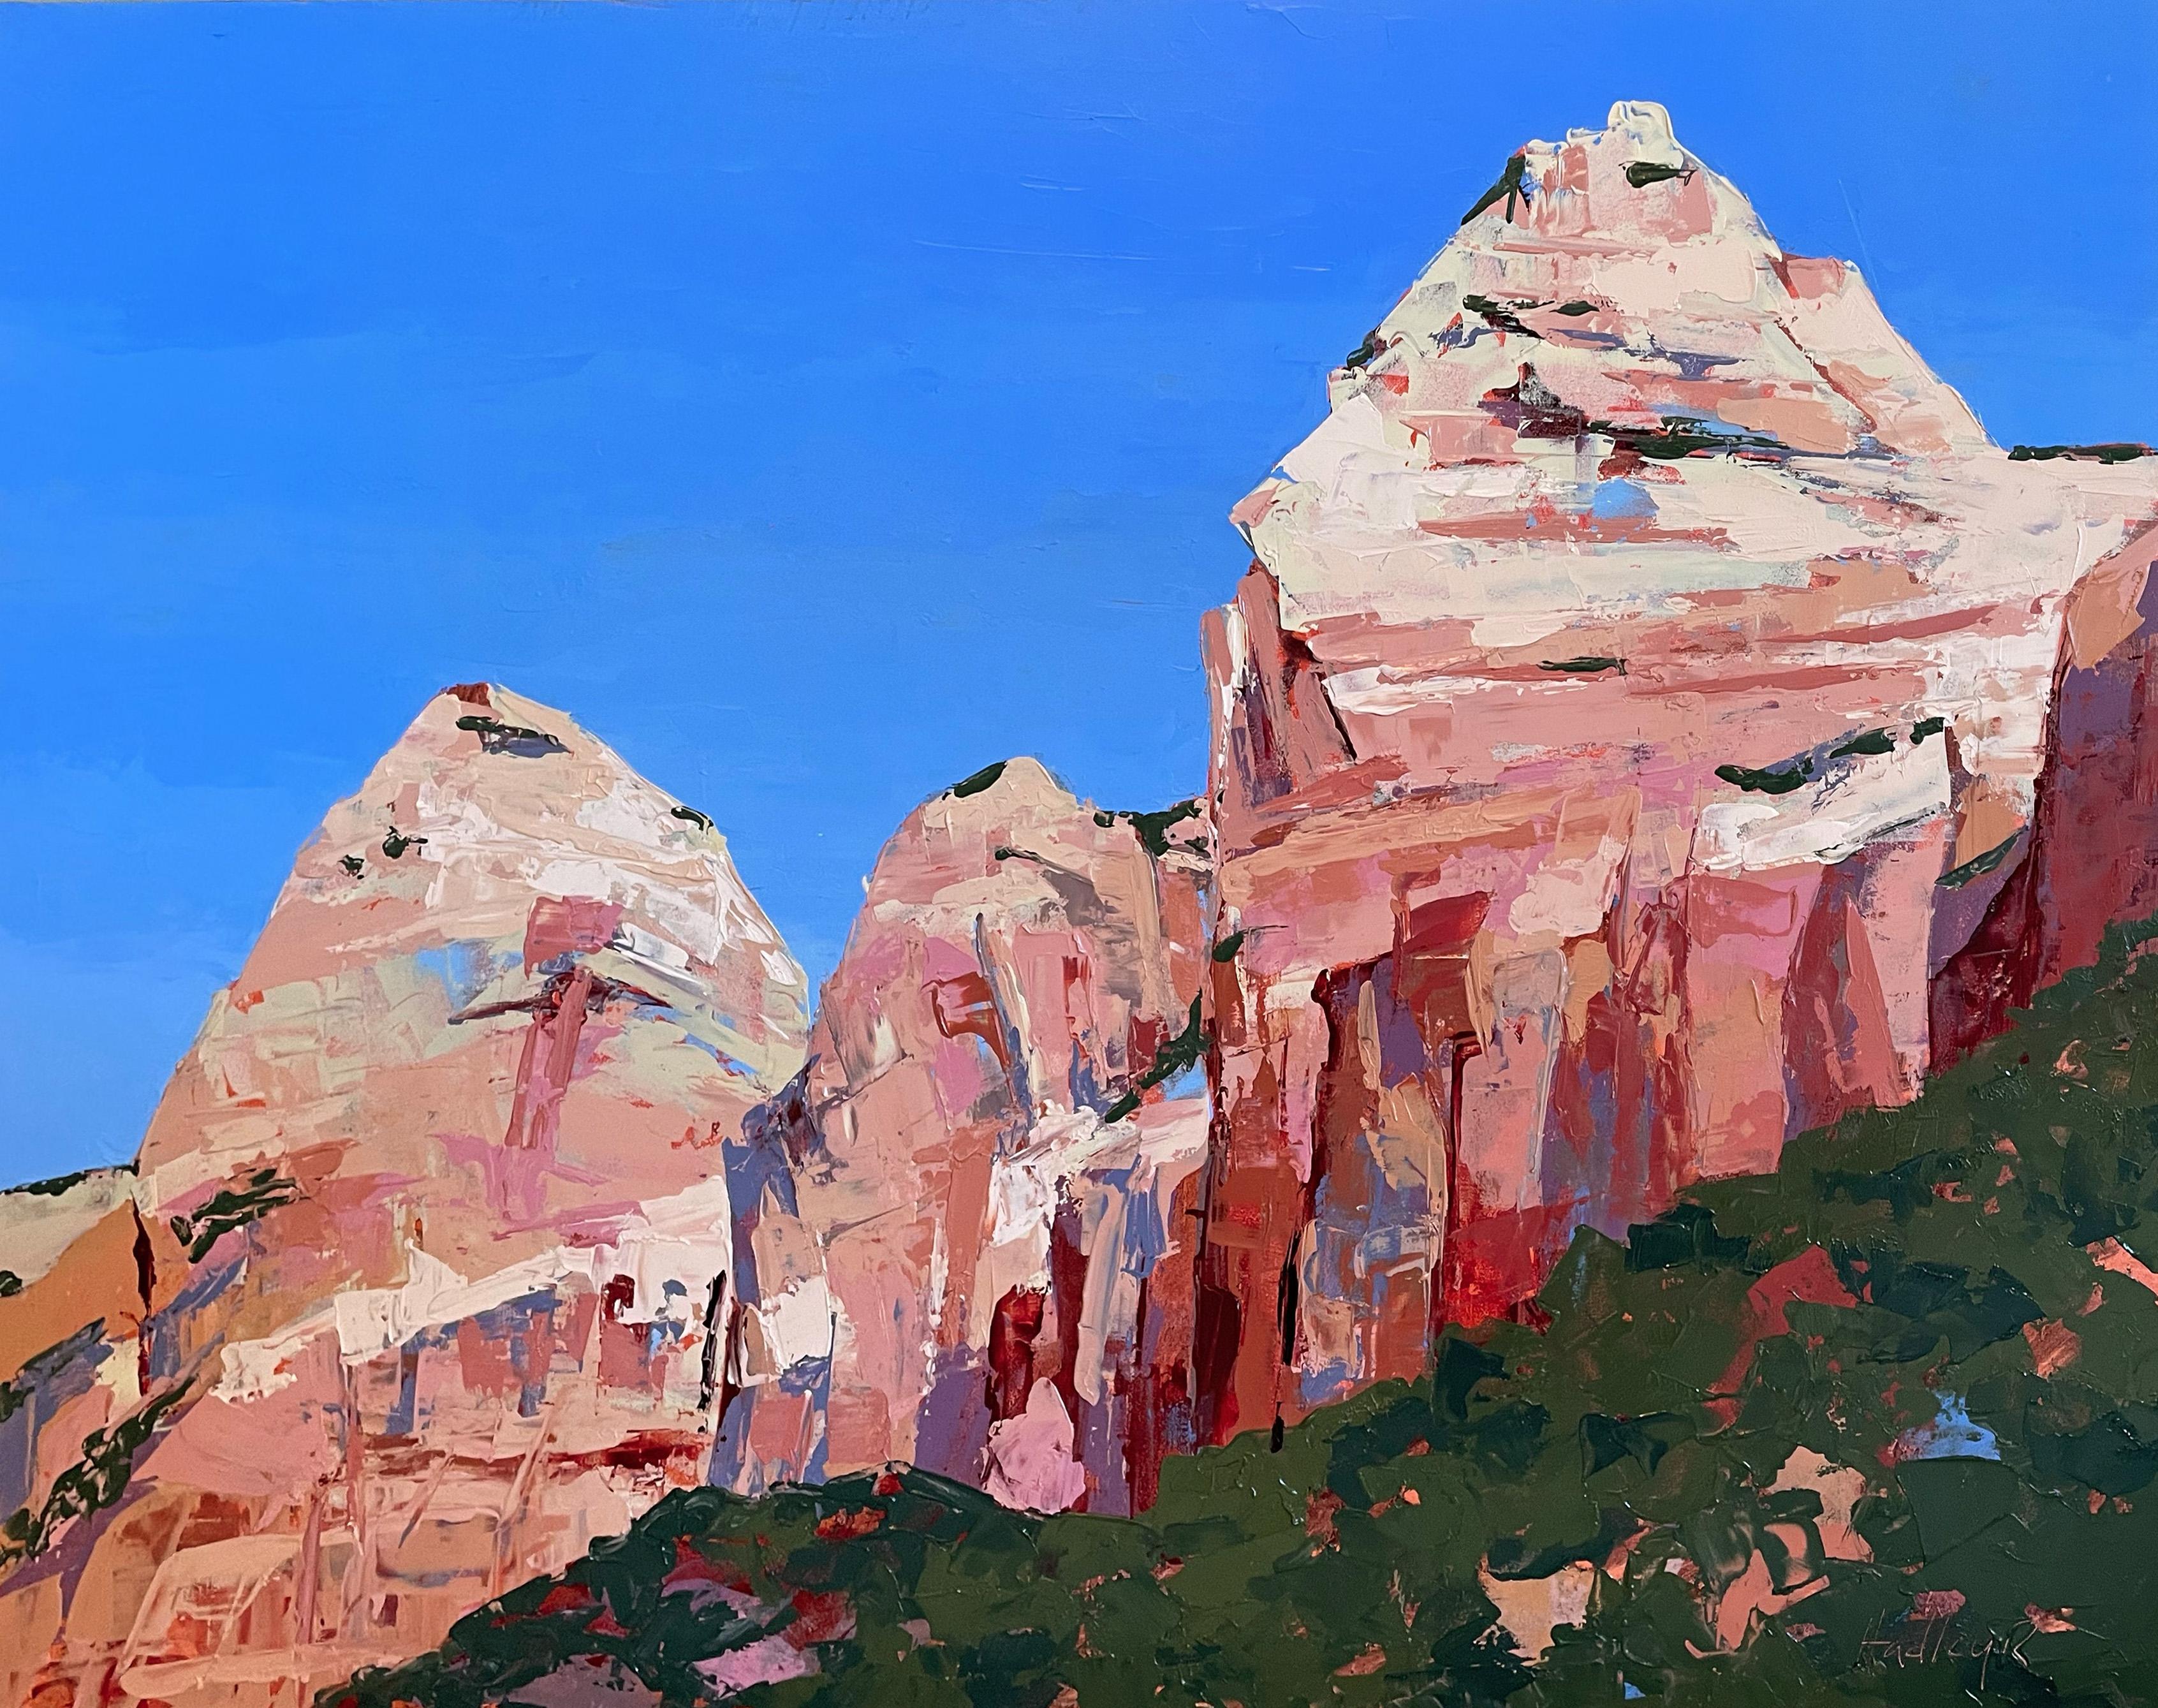 Hadley Rampton Figurative Painting - "Late Afternoon Patriarchs, Zion" Oil Painting